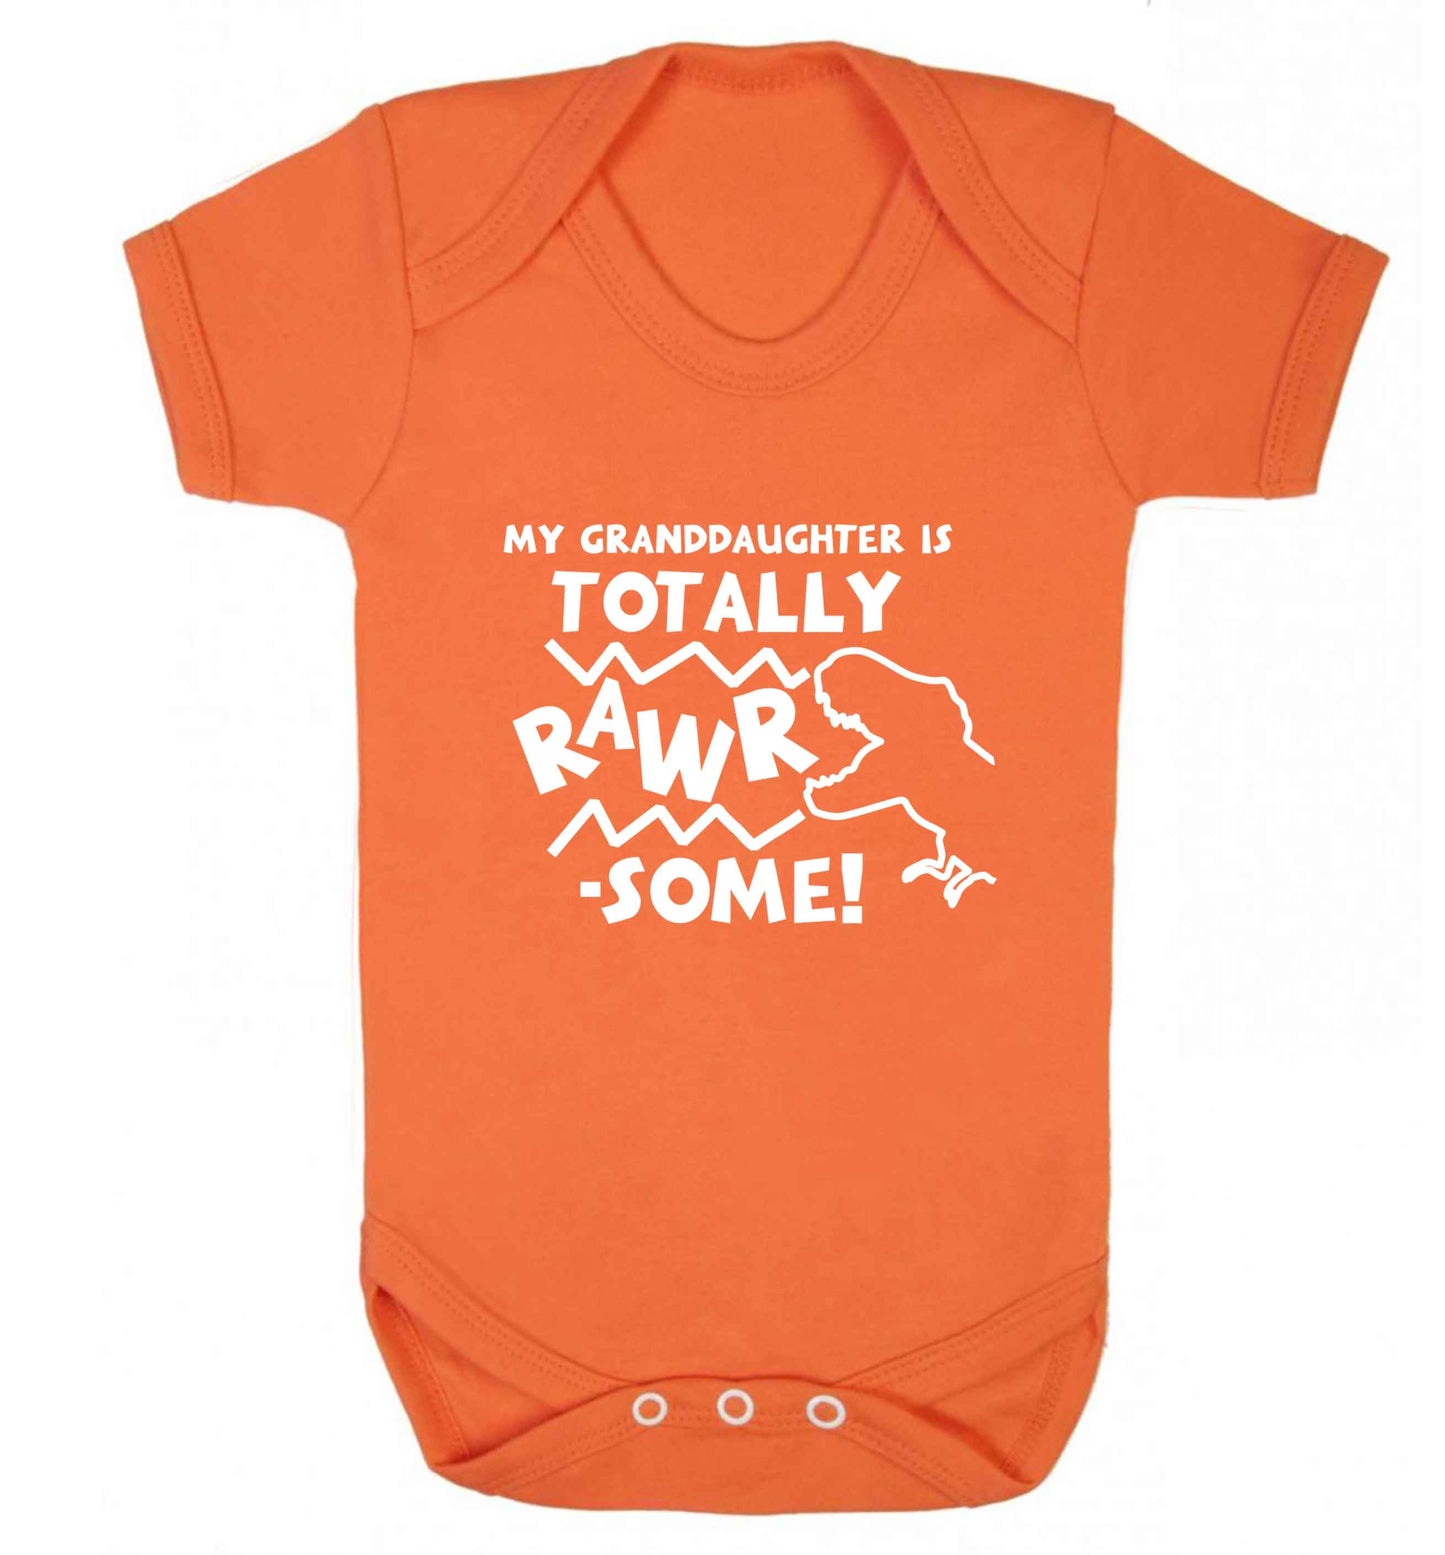 My granddaughter is totally rawrsome baby vest orange 18-24 months